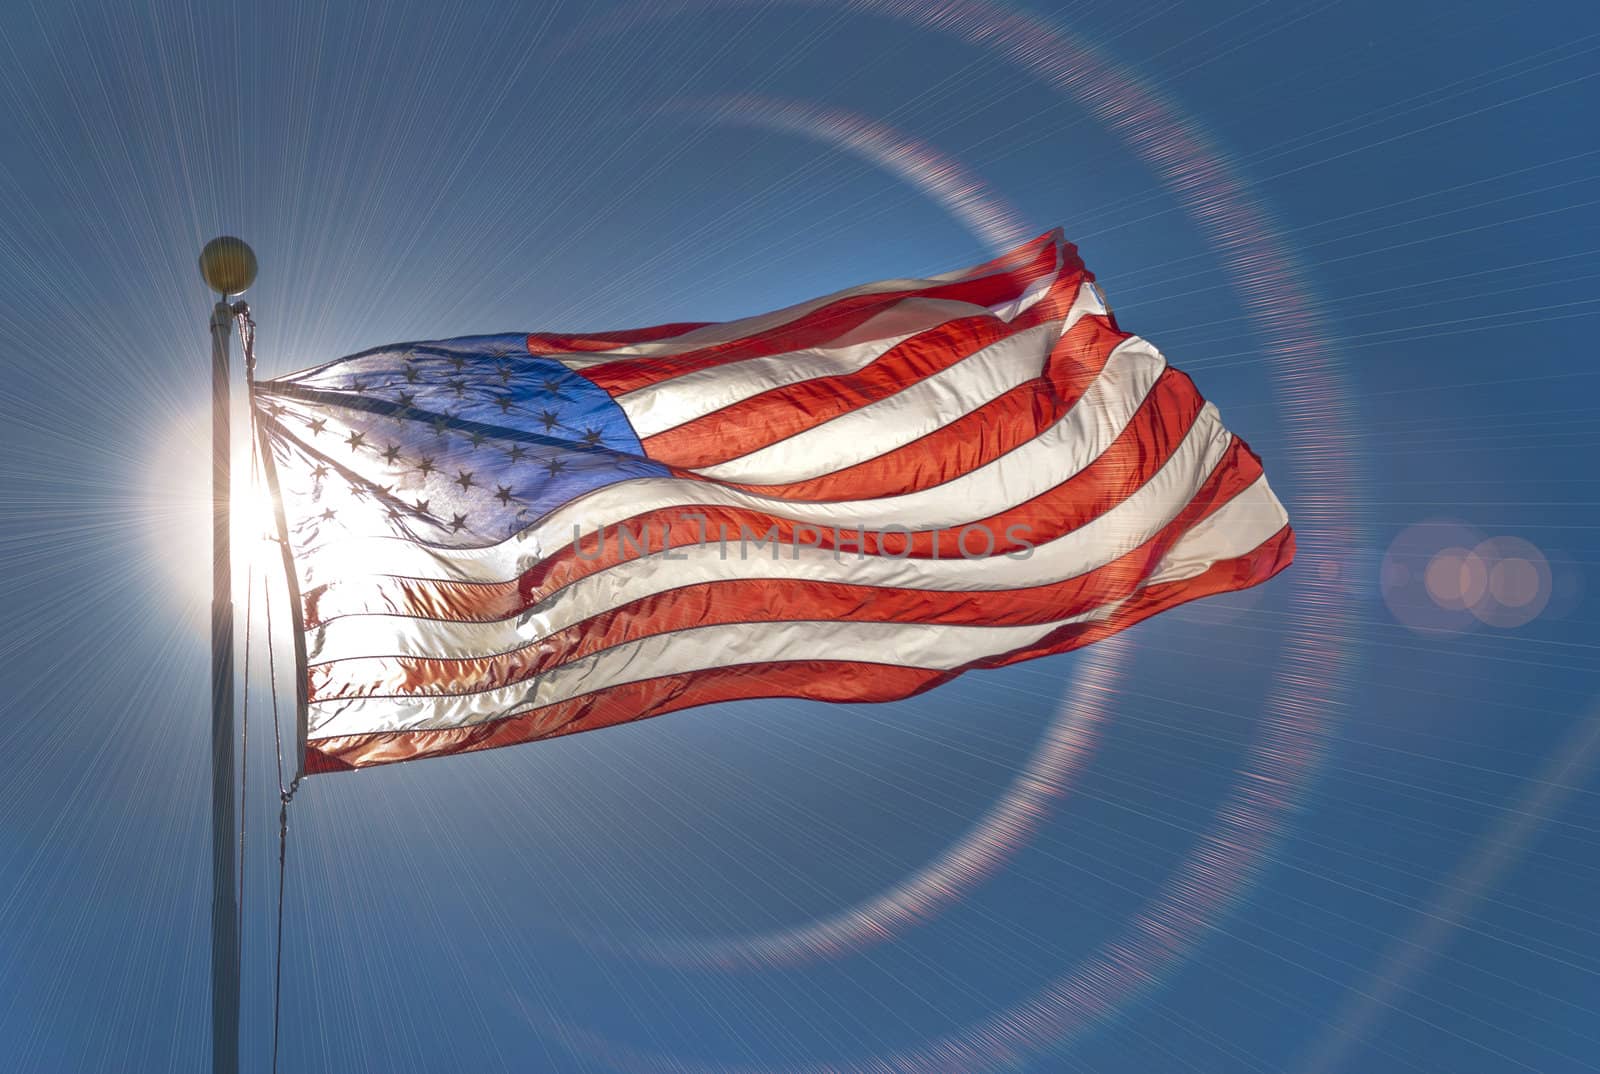 American flag, back lit by the sun, waving in the wind with lens flare